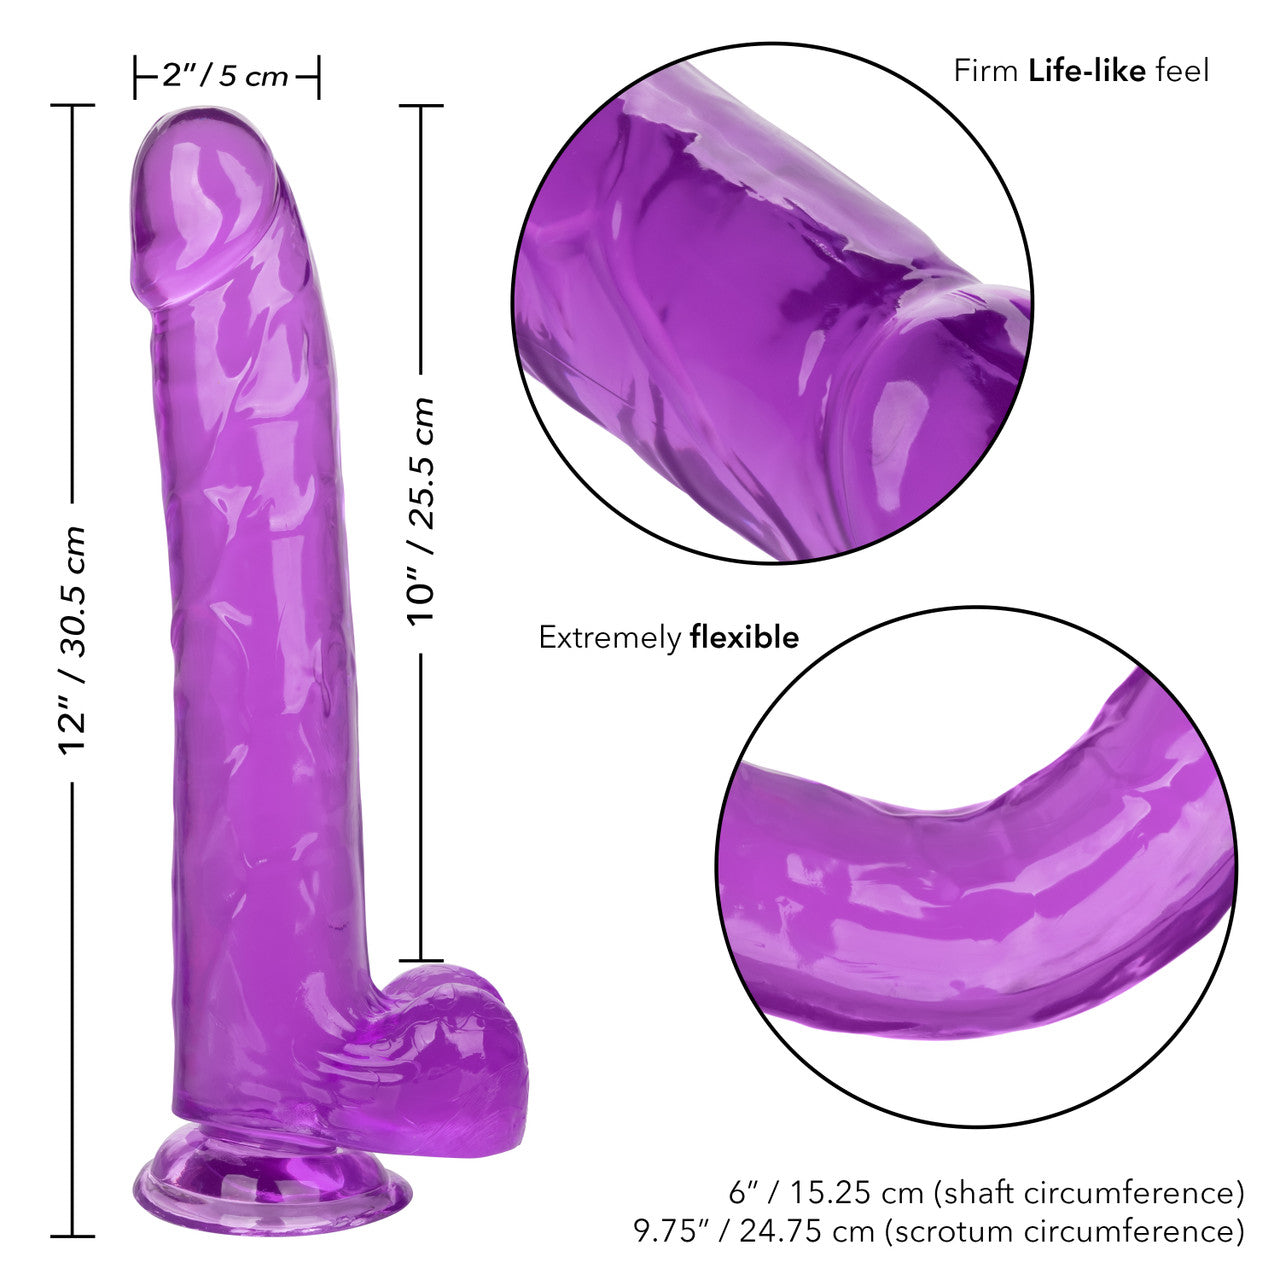 Size Queen 10"/25.5 cm Dildo - Purple - Thorn & Feather